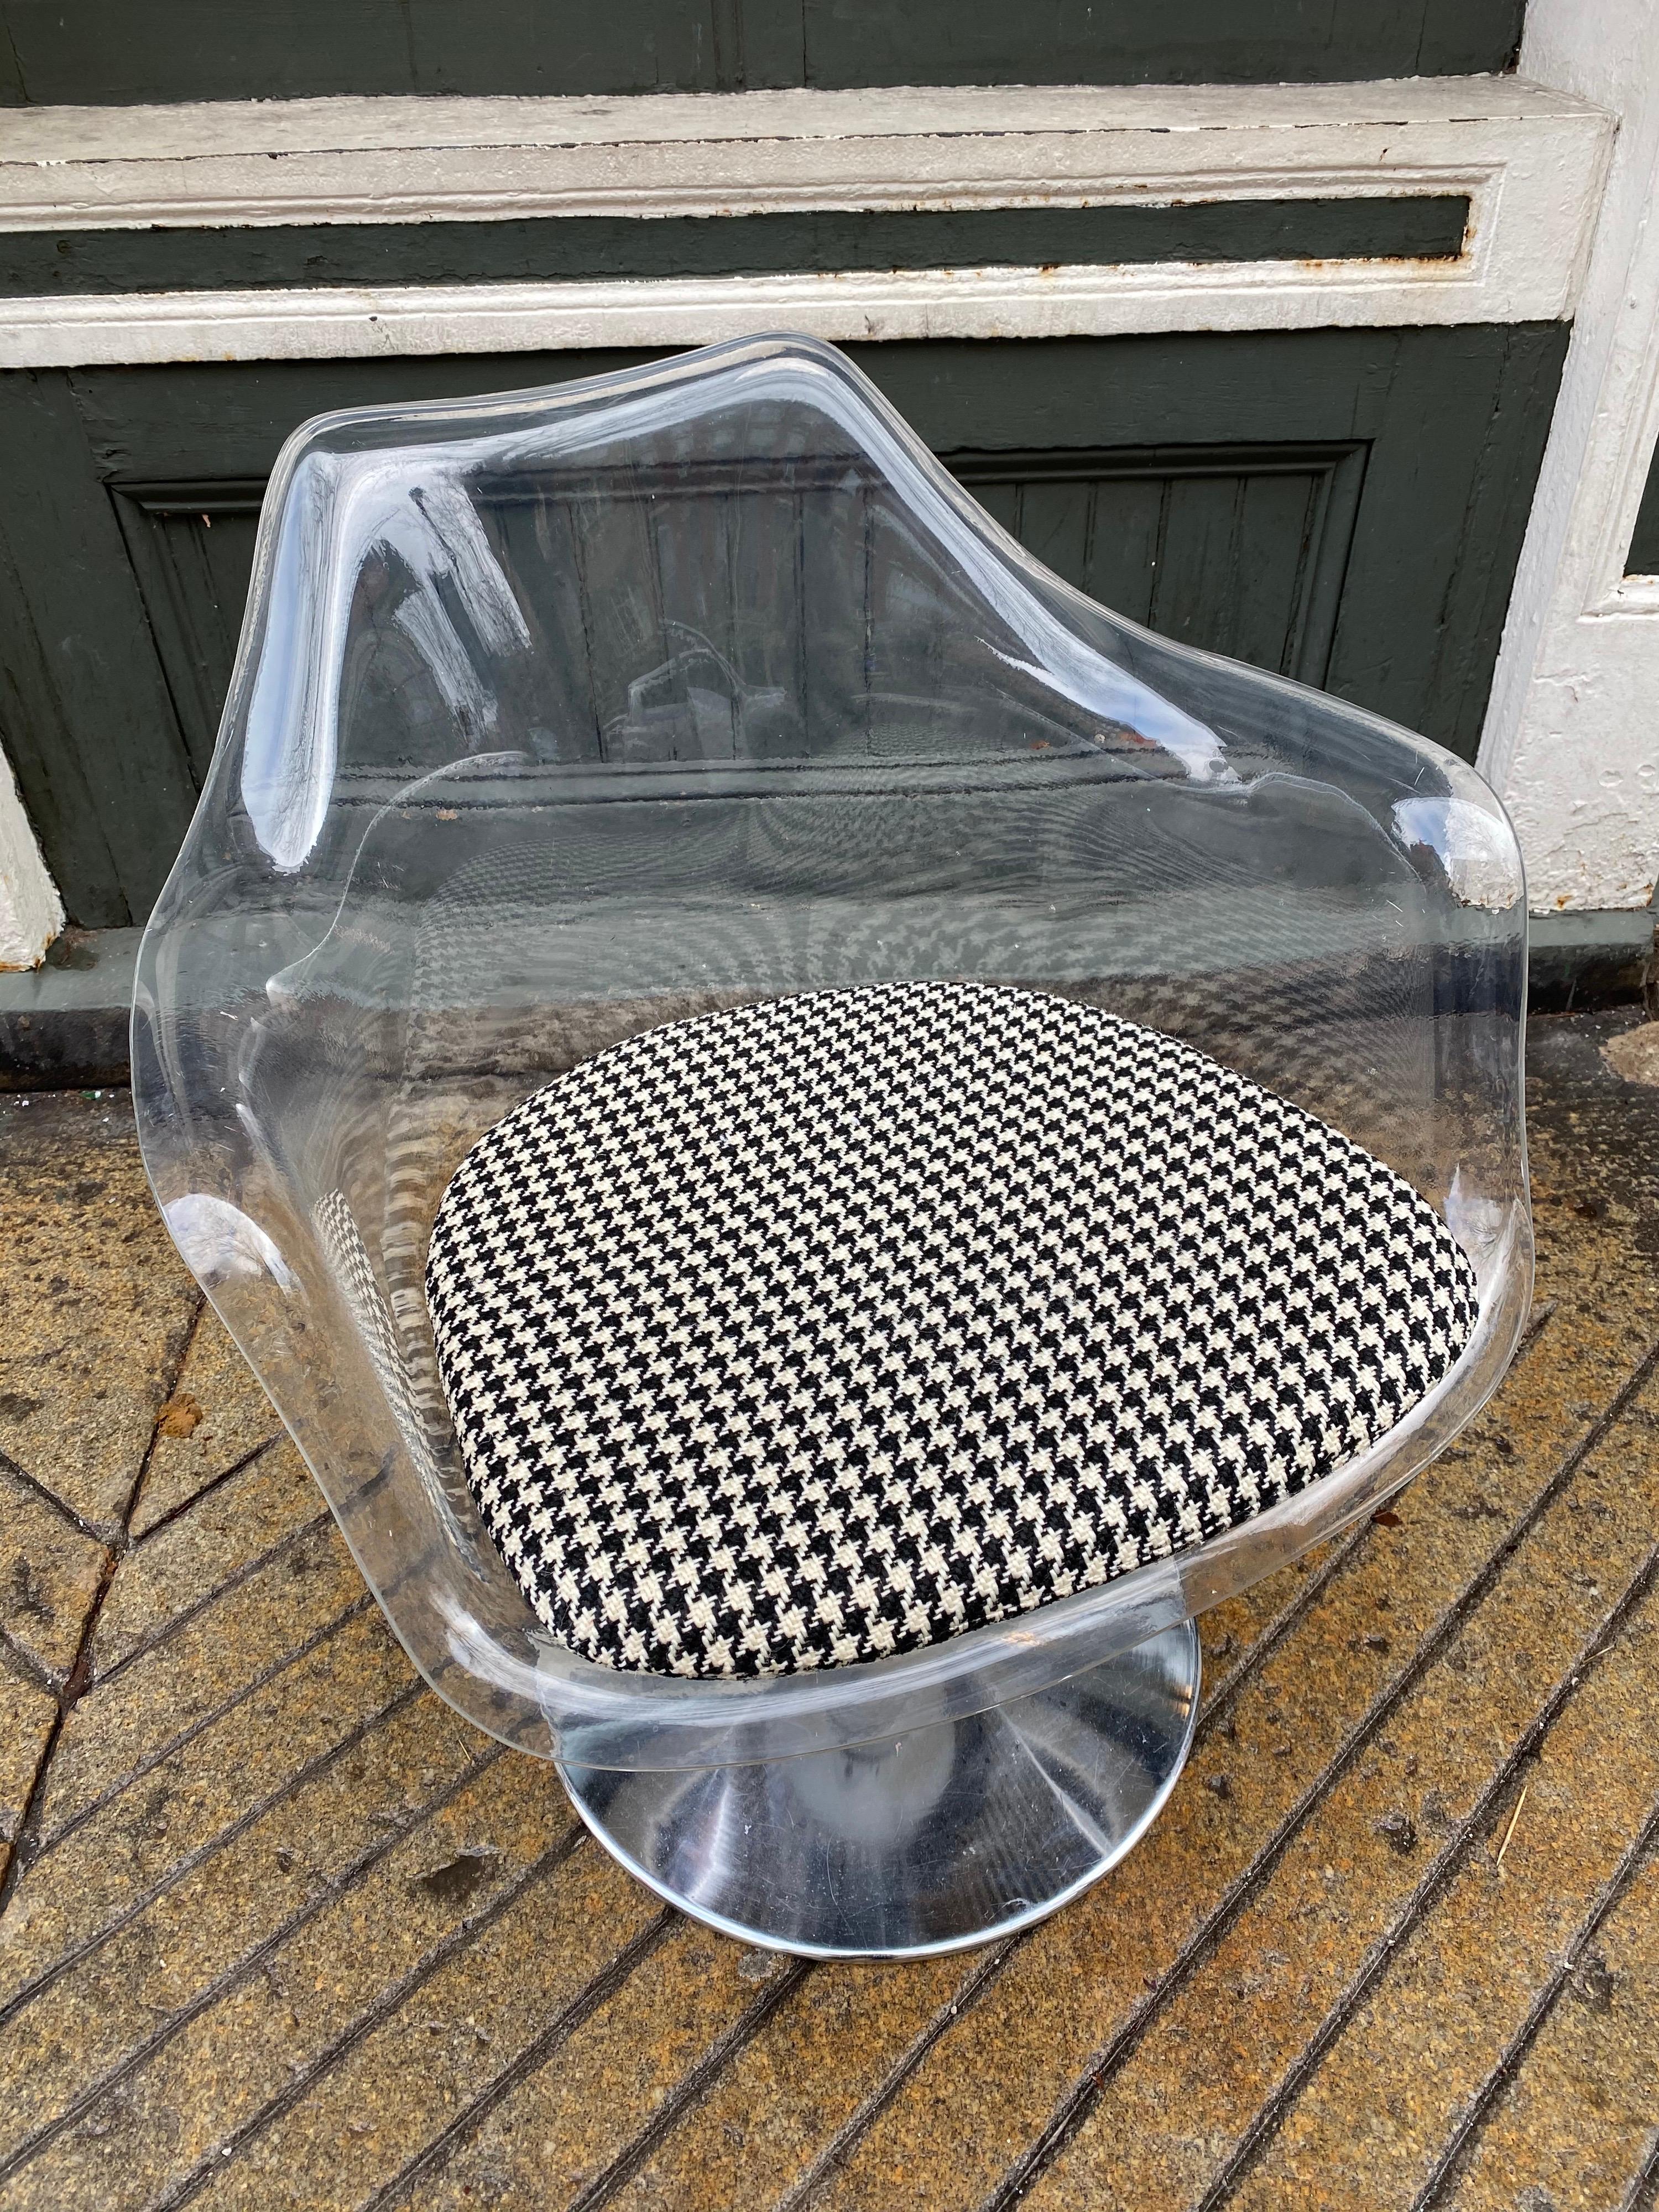 Lucite tulip swivel chair with original herringbone black and white fabric. Lucite in very nice condition. Chair dates to the late 1960s chrome base looks pretty good as well! Fun accent chair to use in many ways! Perfect at a desk or work table!